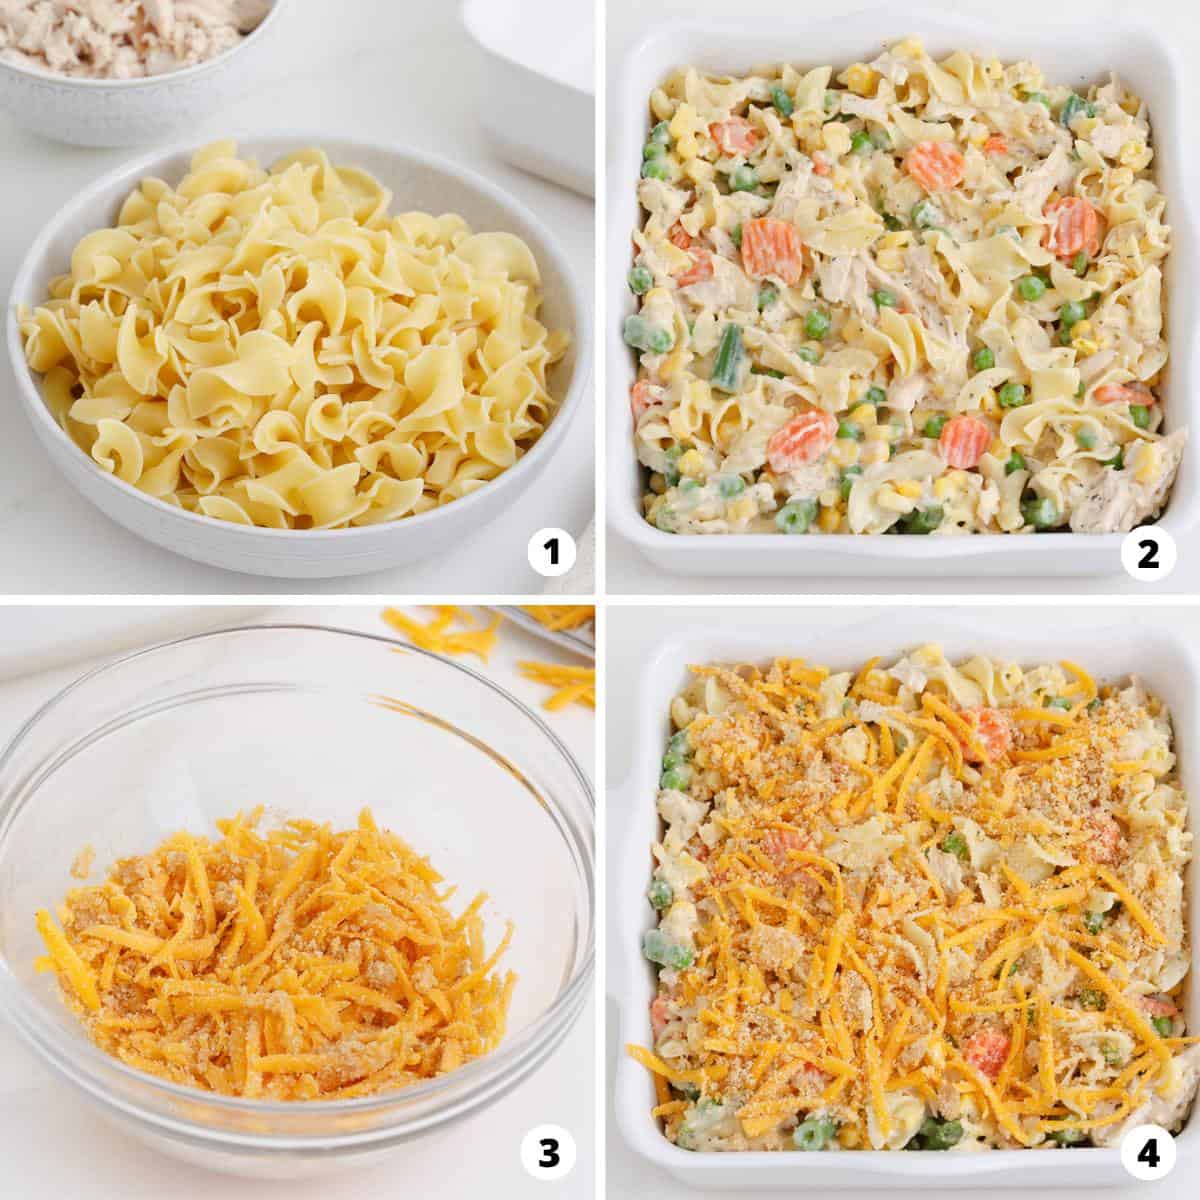 Showing how to make chicken noodle casserole in a 4 step collage.